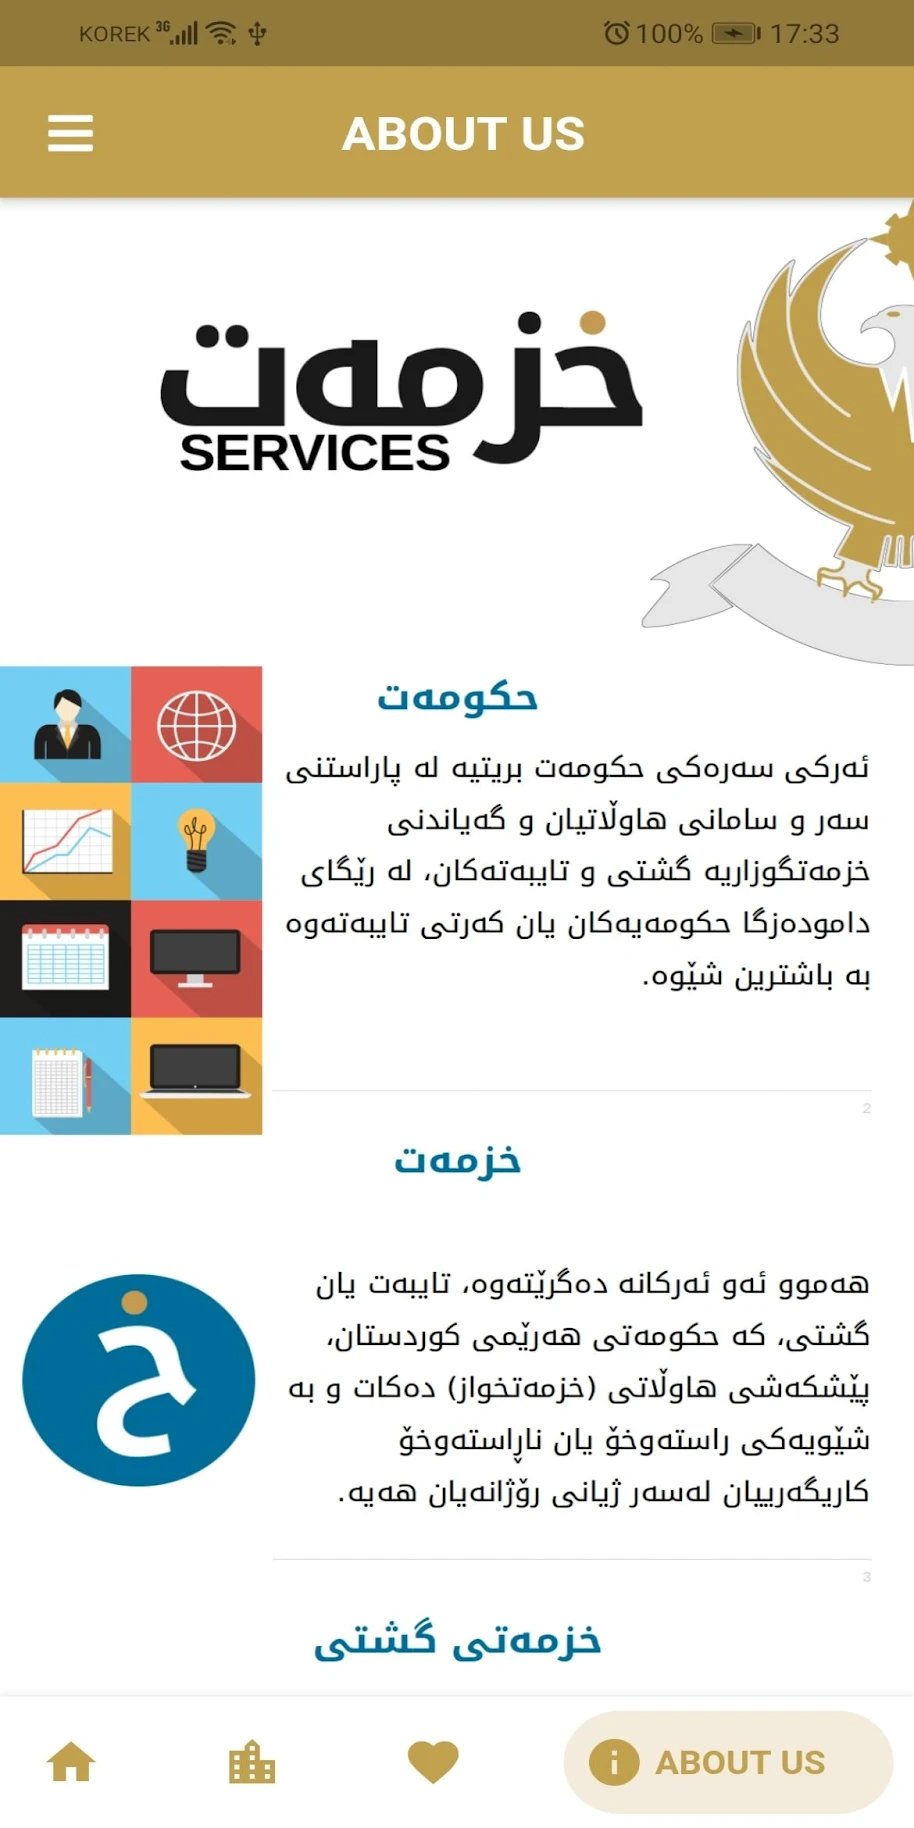 Xizmat app is developed by Jiasaz company for IT services